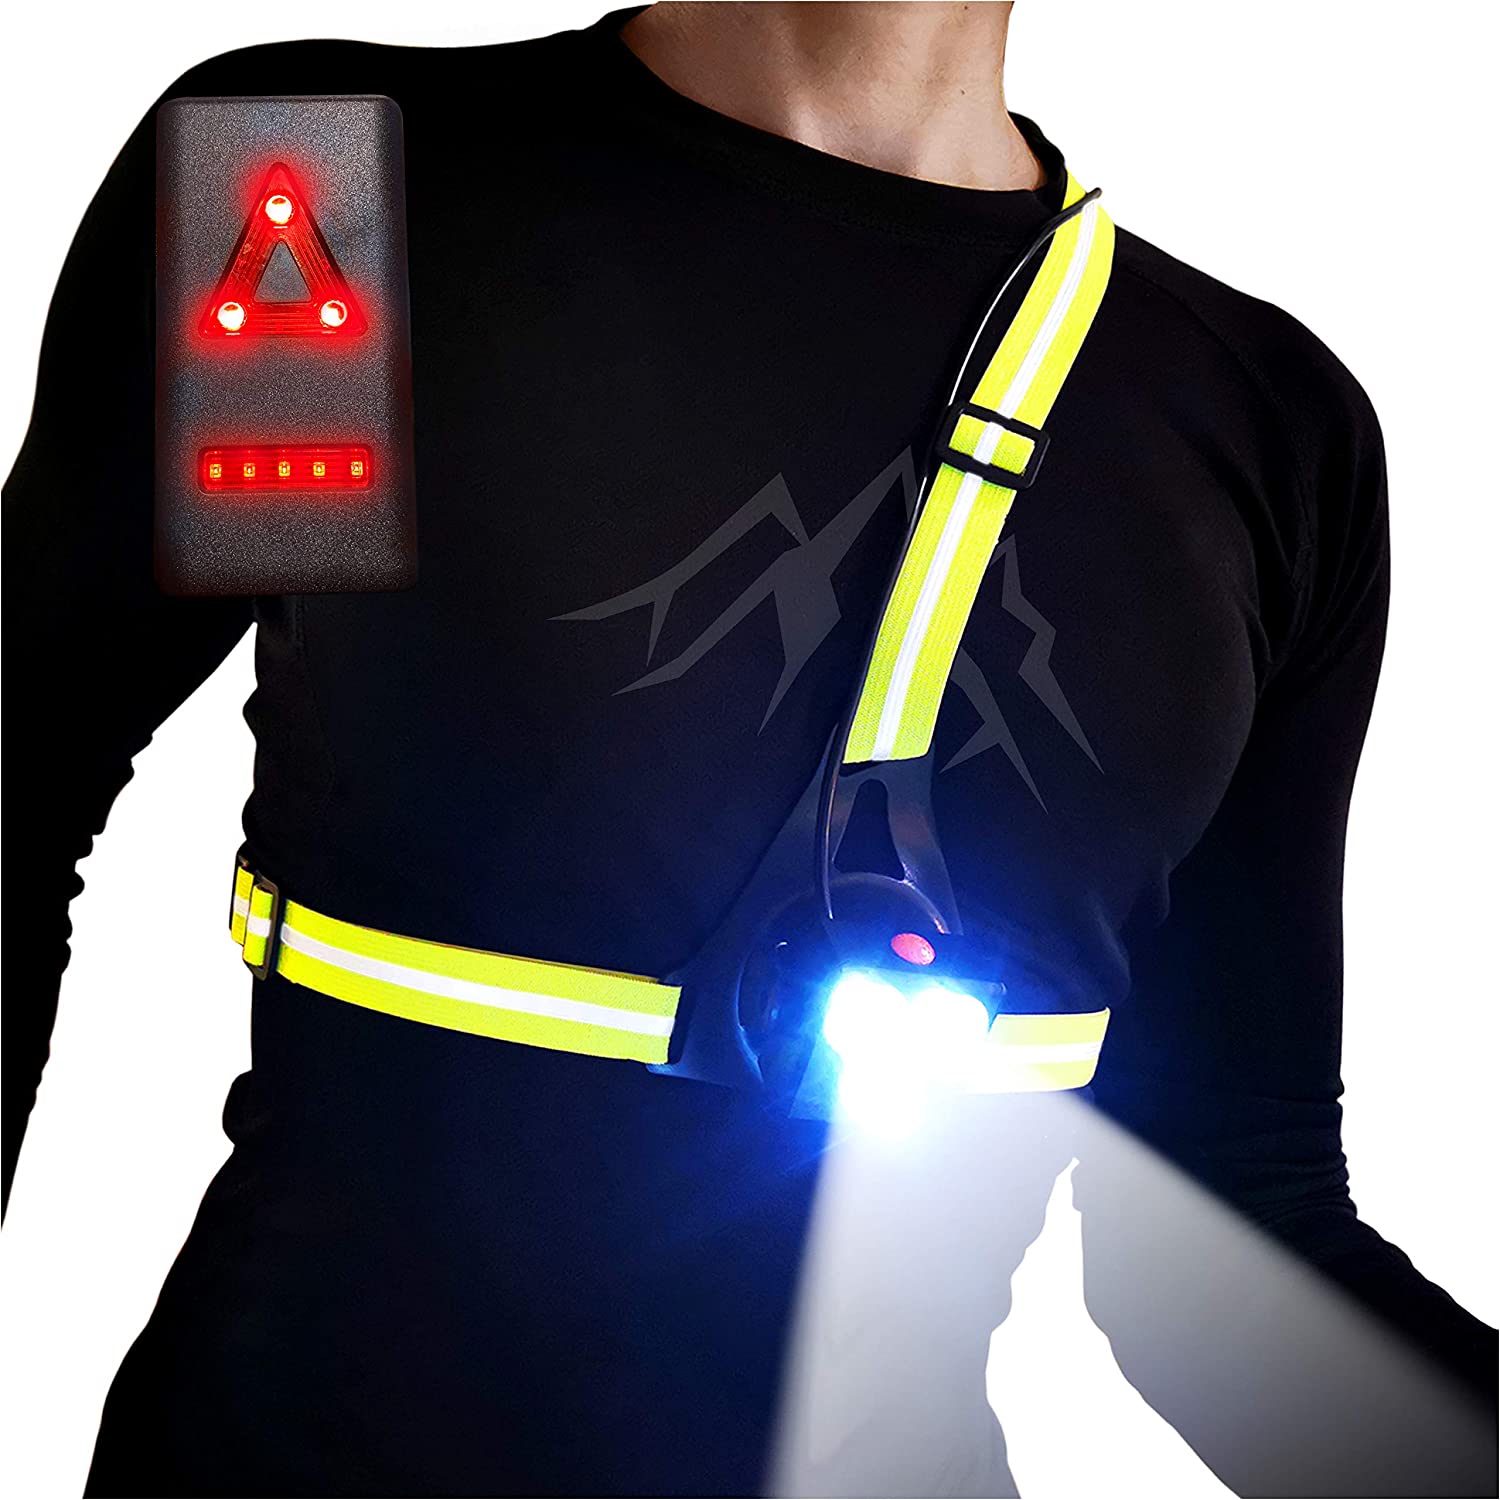 RODH Running Jogging Led Safety Lights Night Walking Running Gear Wearable Super Bright USB Rechargeable Battery with Adjustable Strap 1 Pack